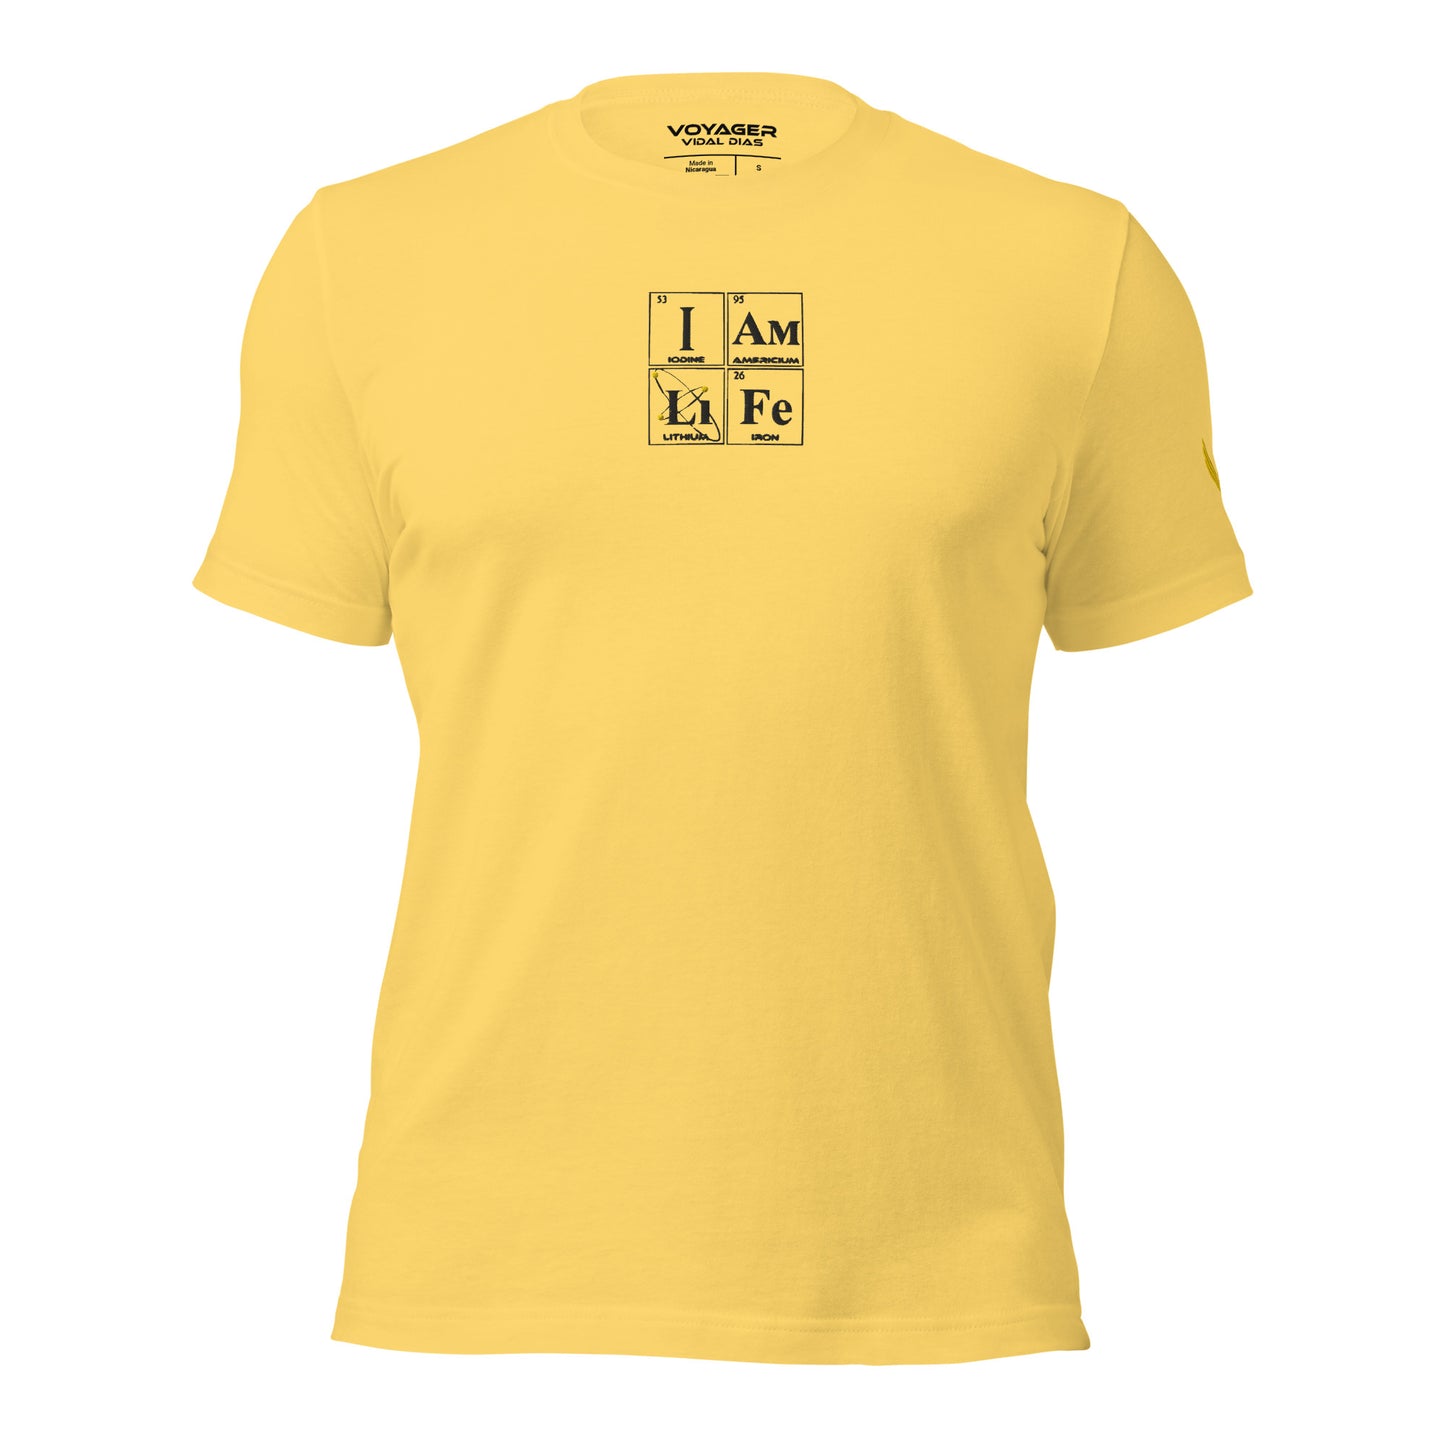 I Am Life embroidered t-shirt